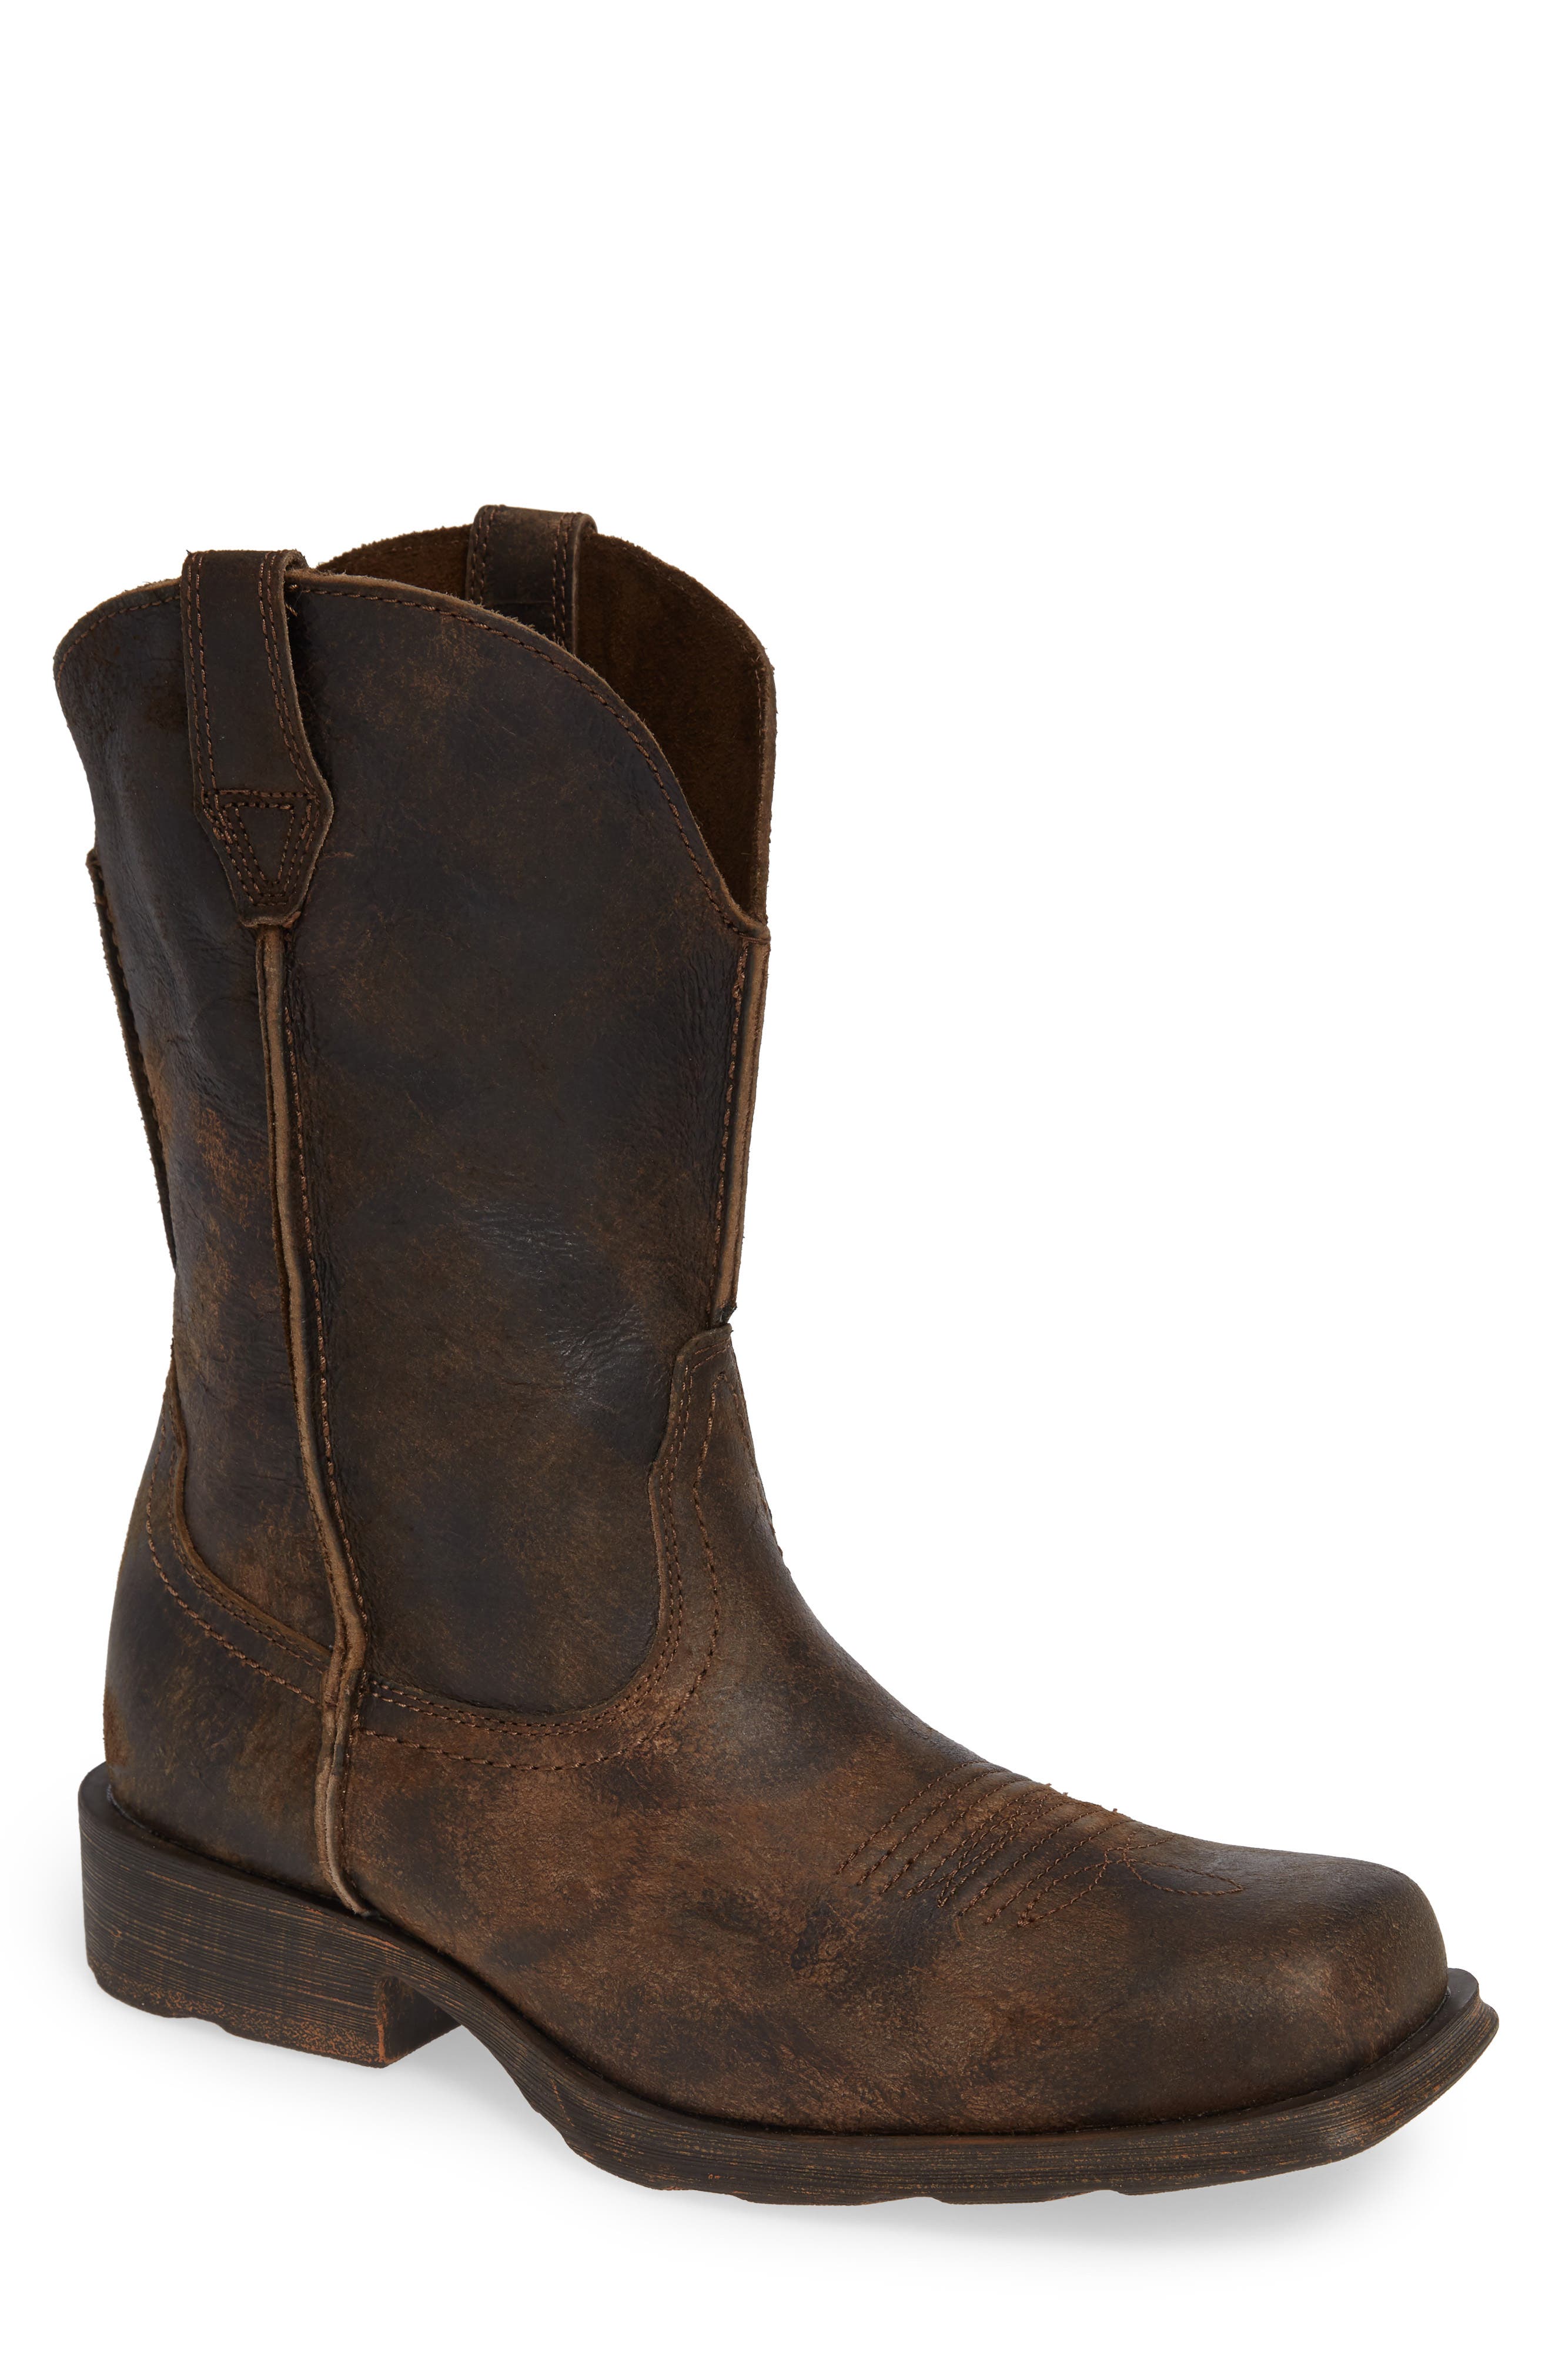 ariat boots sale clearance